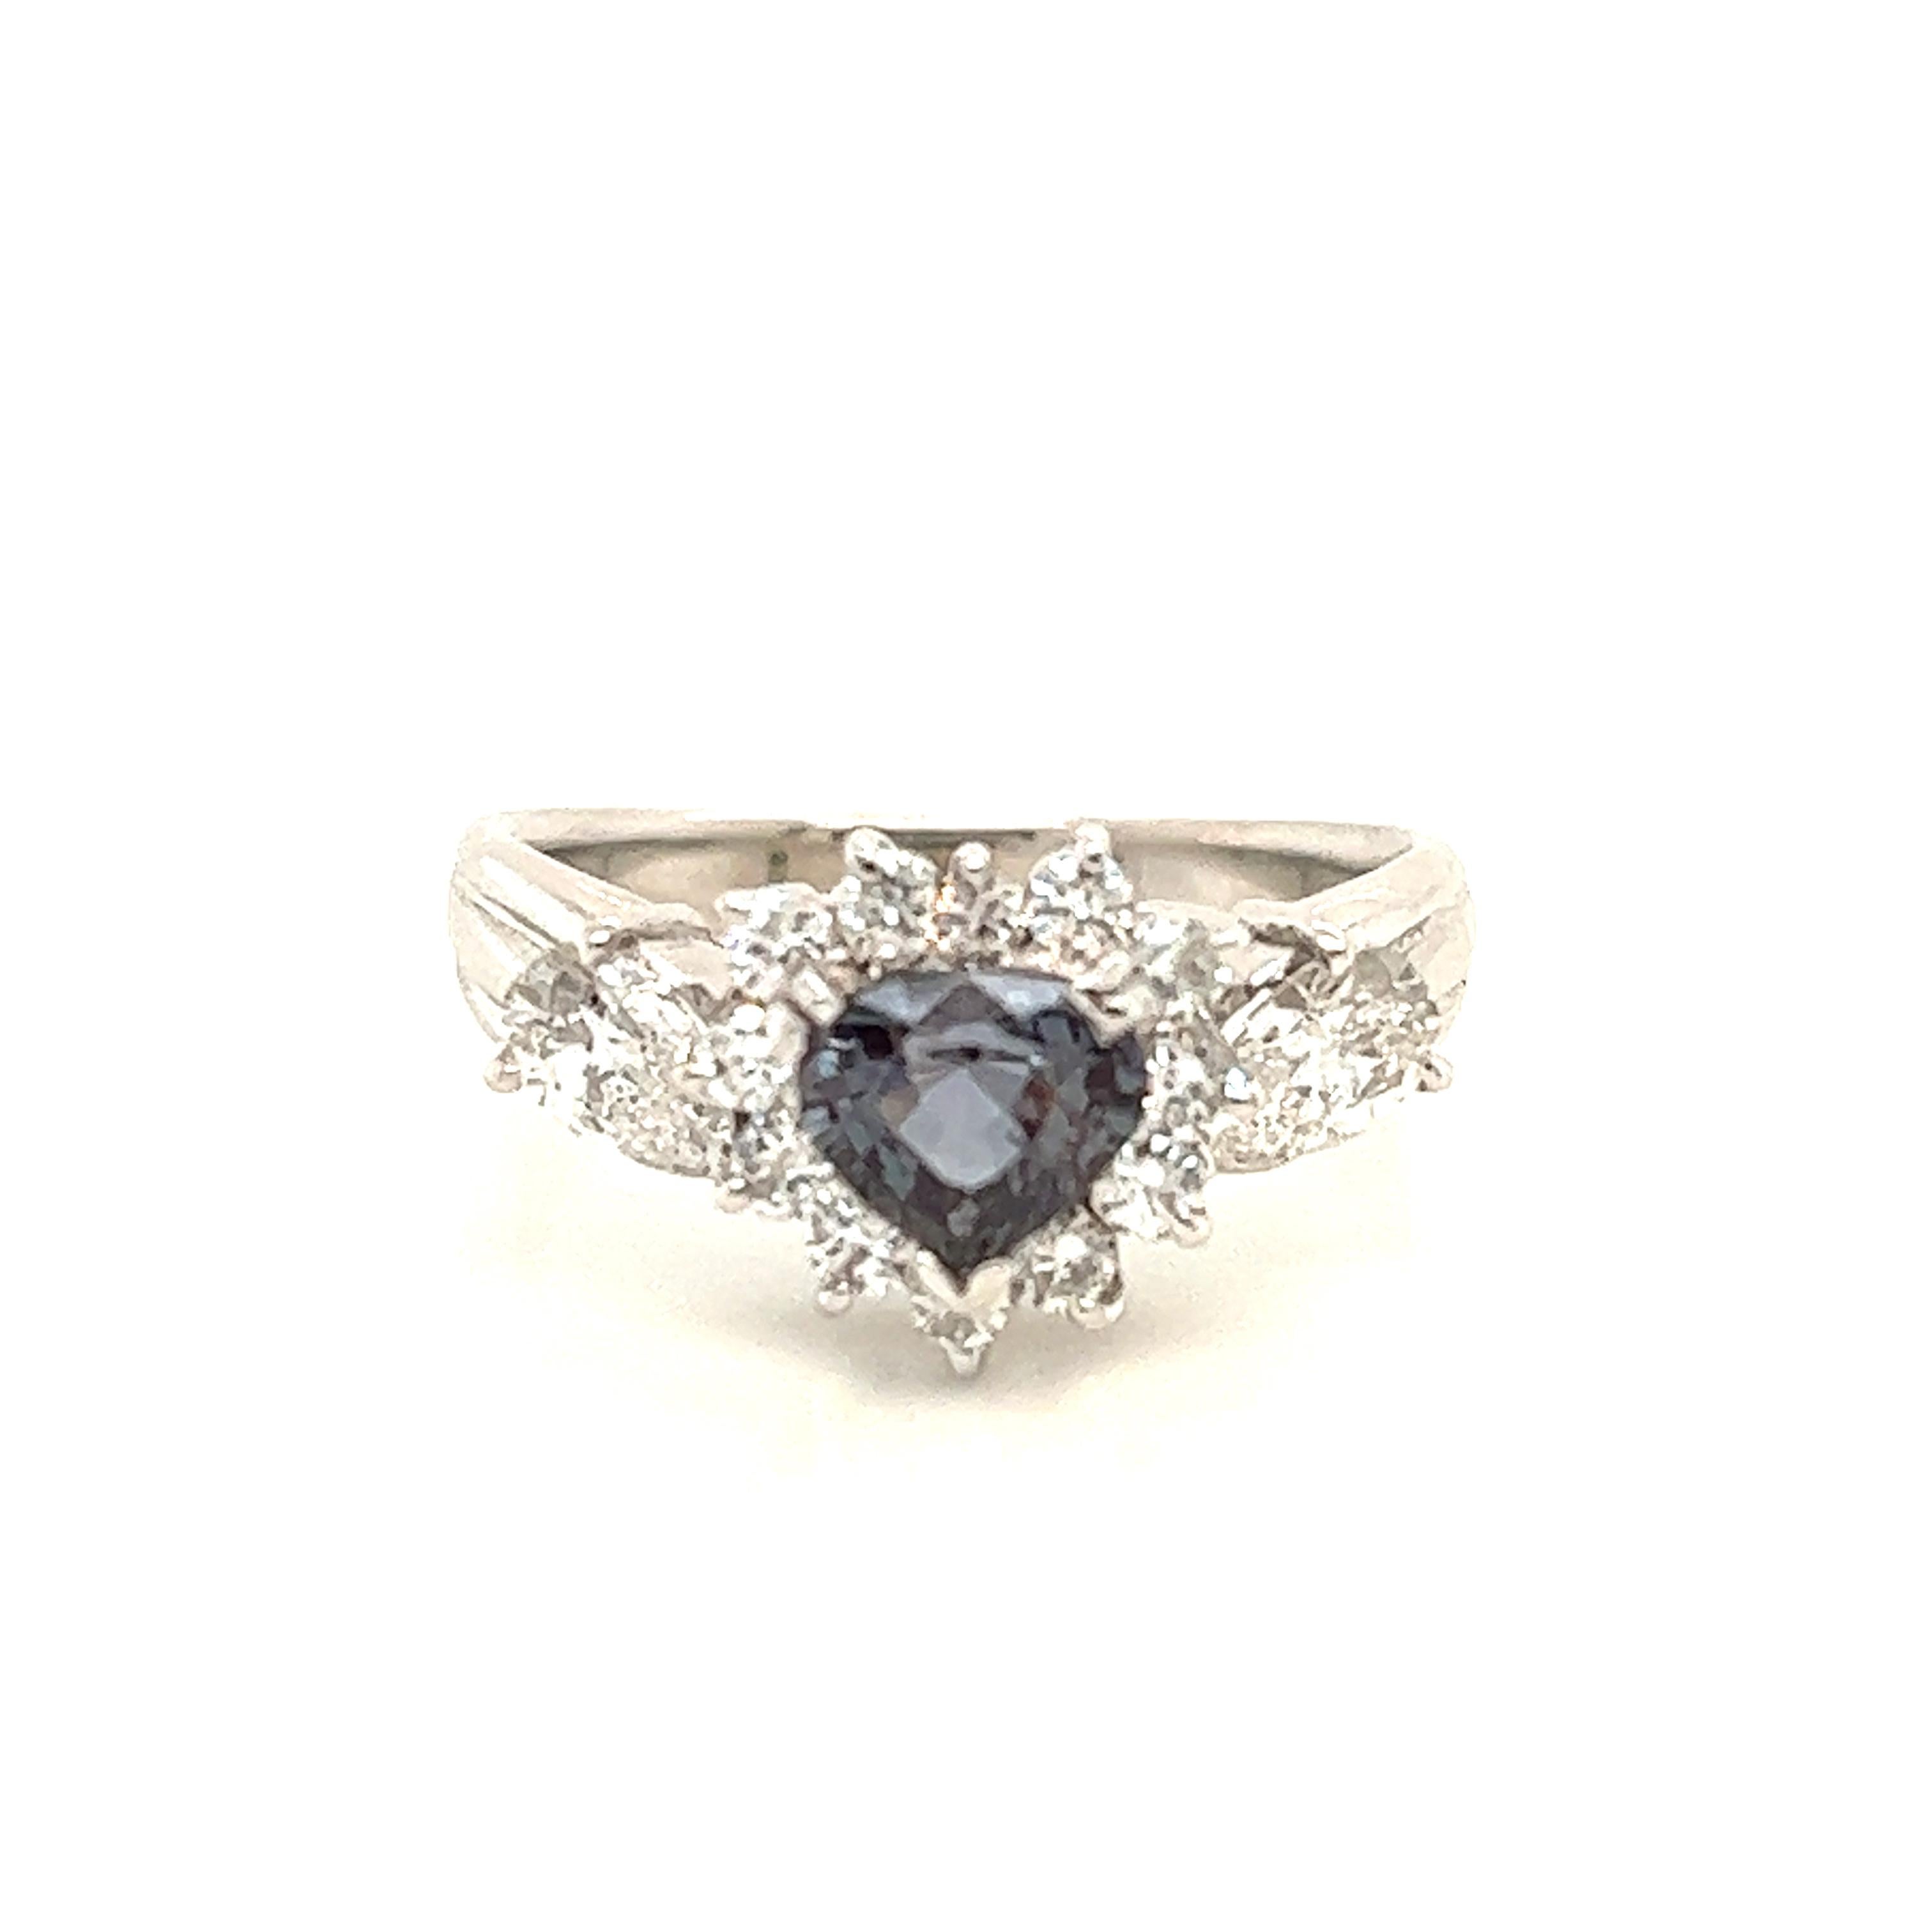 This is a gorgeous natural AAA quality heart Alexandrite surrounded by dainty diamonds that is set in a vintage platinum setting. This ring features a natural 0.87carat heart alexandrite that is certified by the Gemological Institute of America